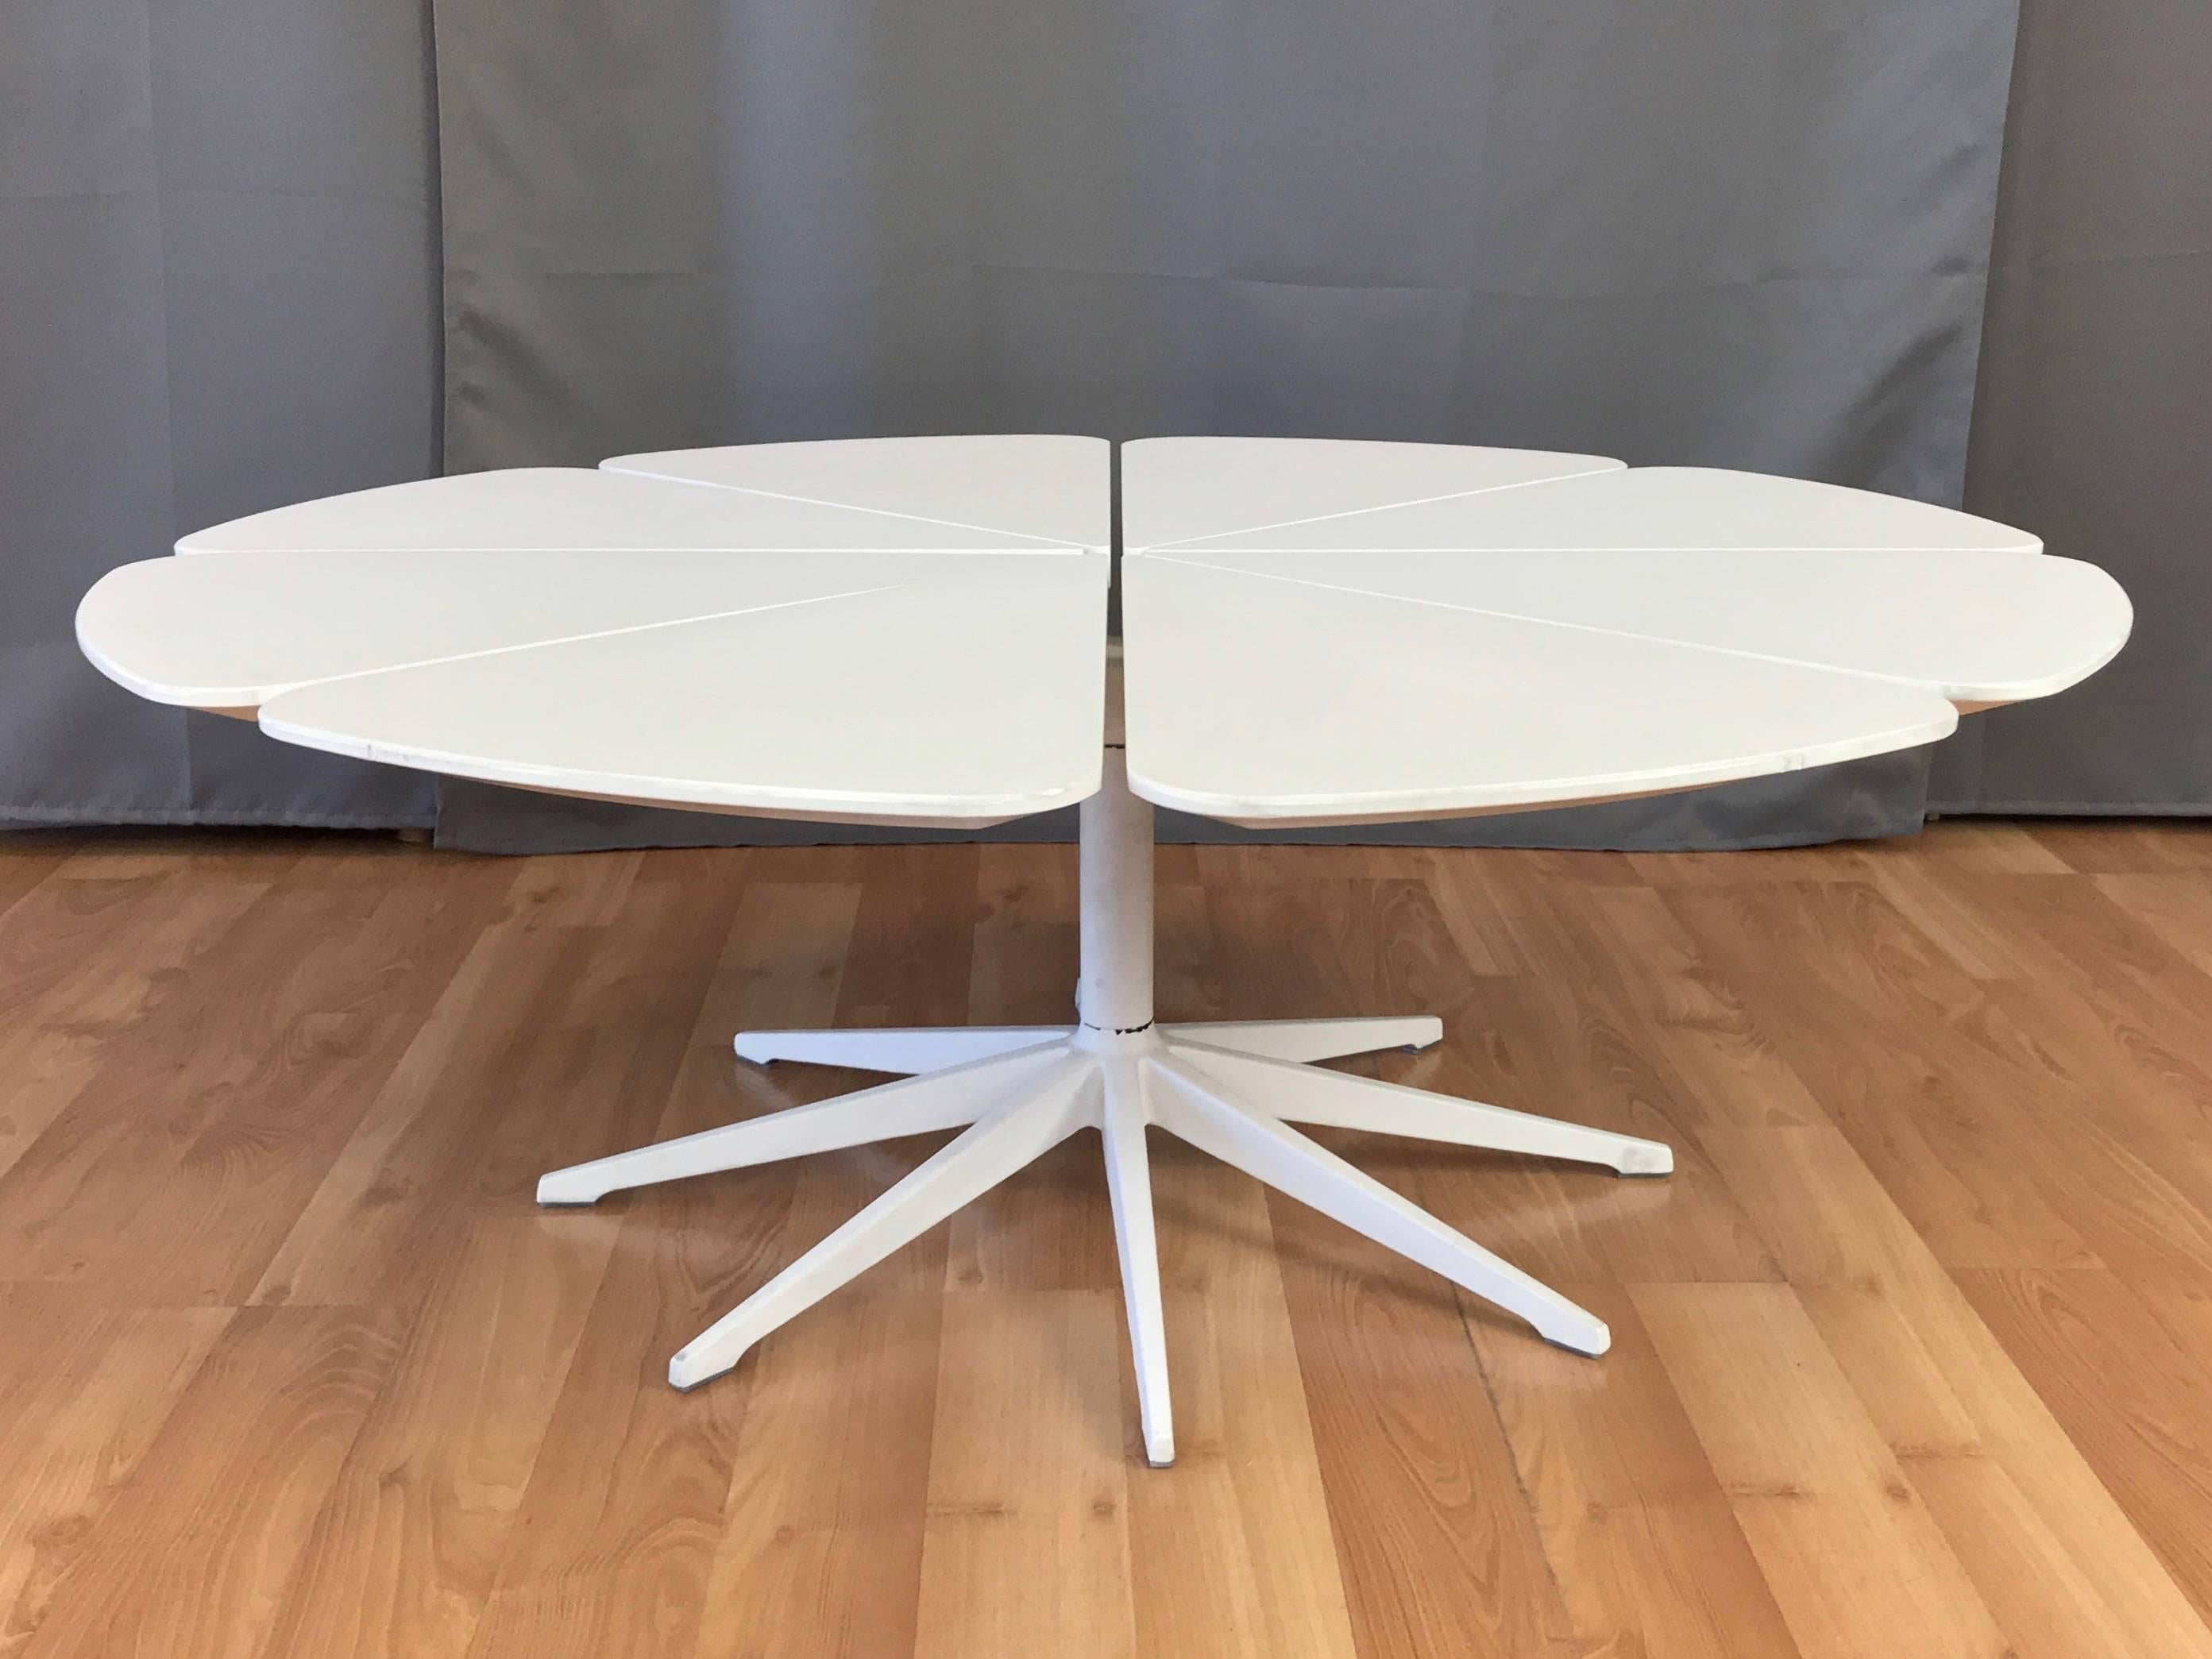 A Knoll Petal coffee table by Richard Schultz with outdoor-rated white high density polyurethane top.

Designed in 1960 to accompany Knoll’s Bertoia chairs, this example of the design icon was produced in the early 2000s. Inspired by Queen Anne’s